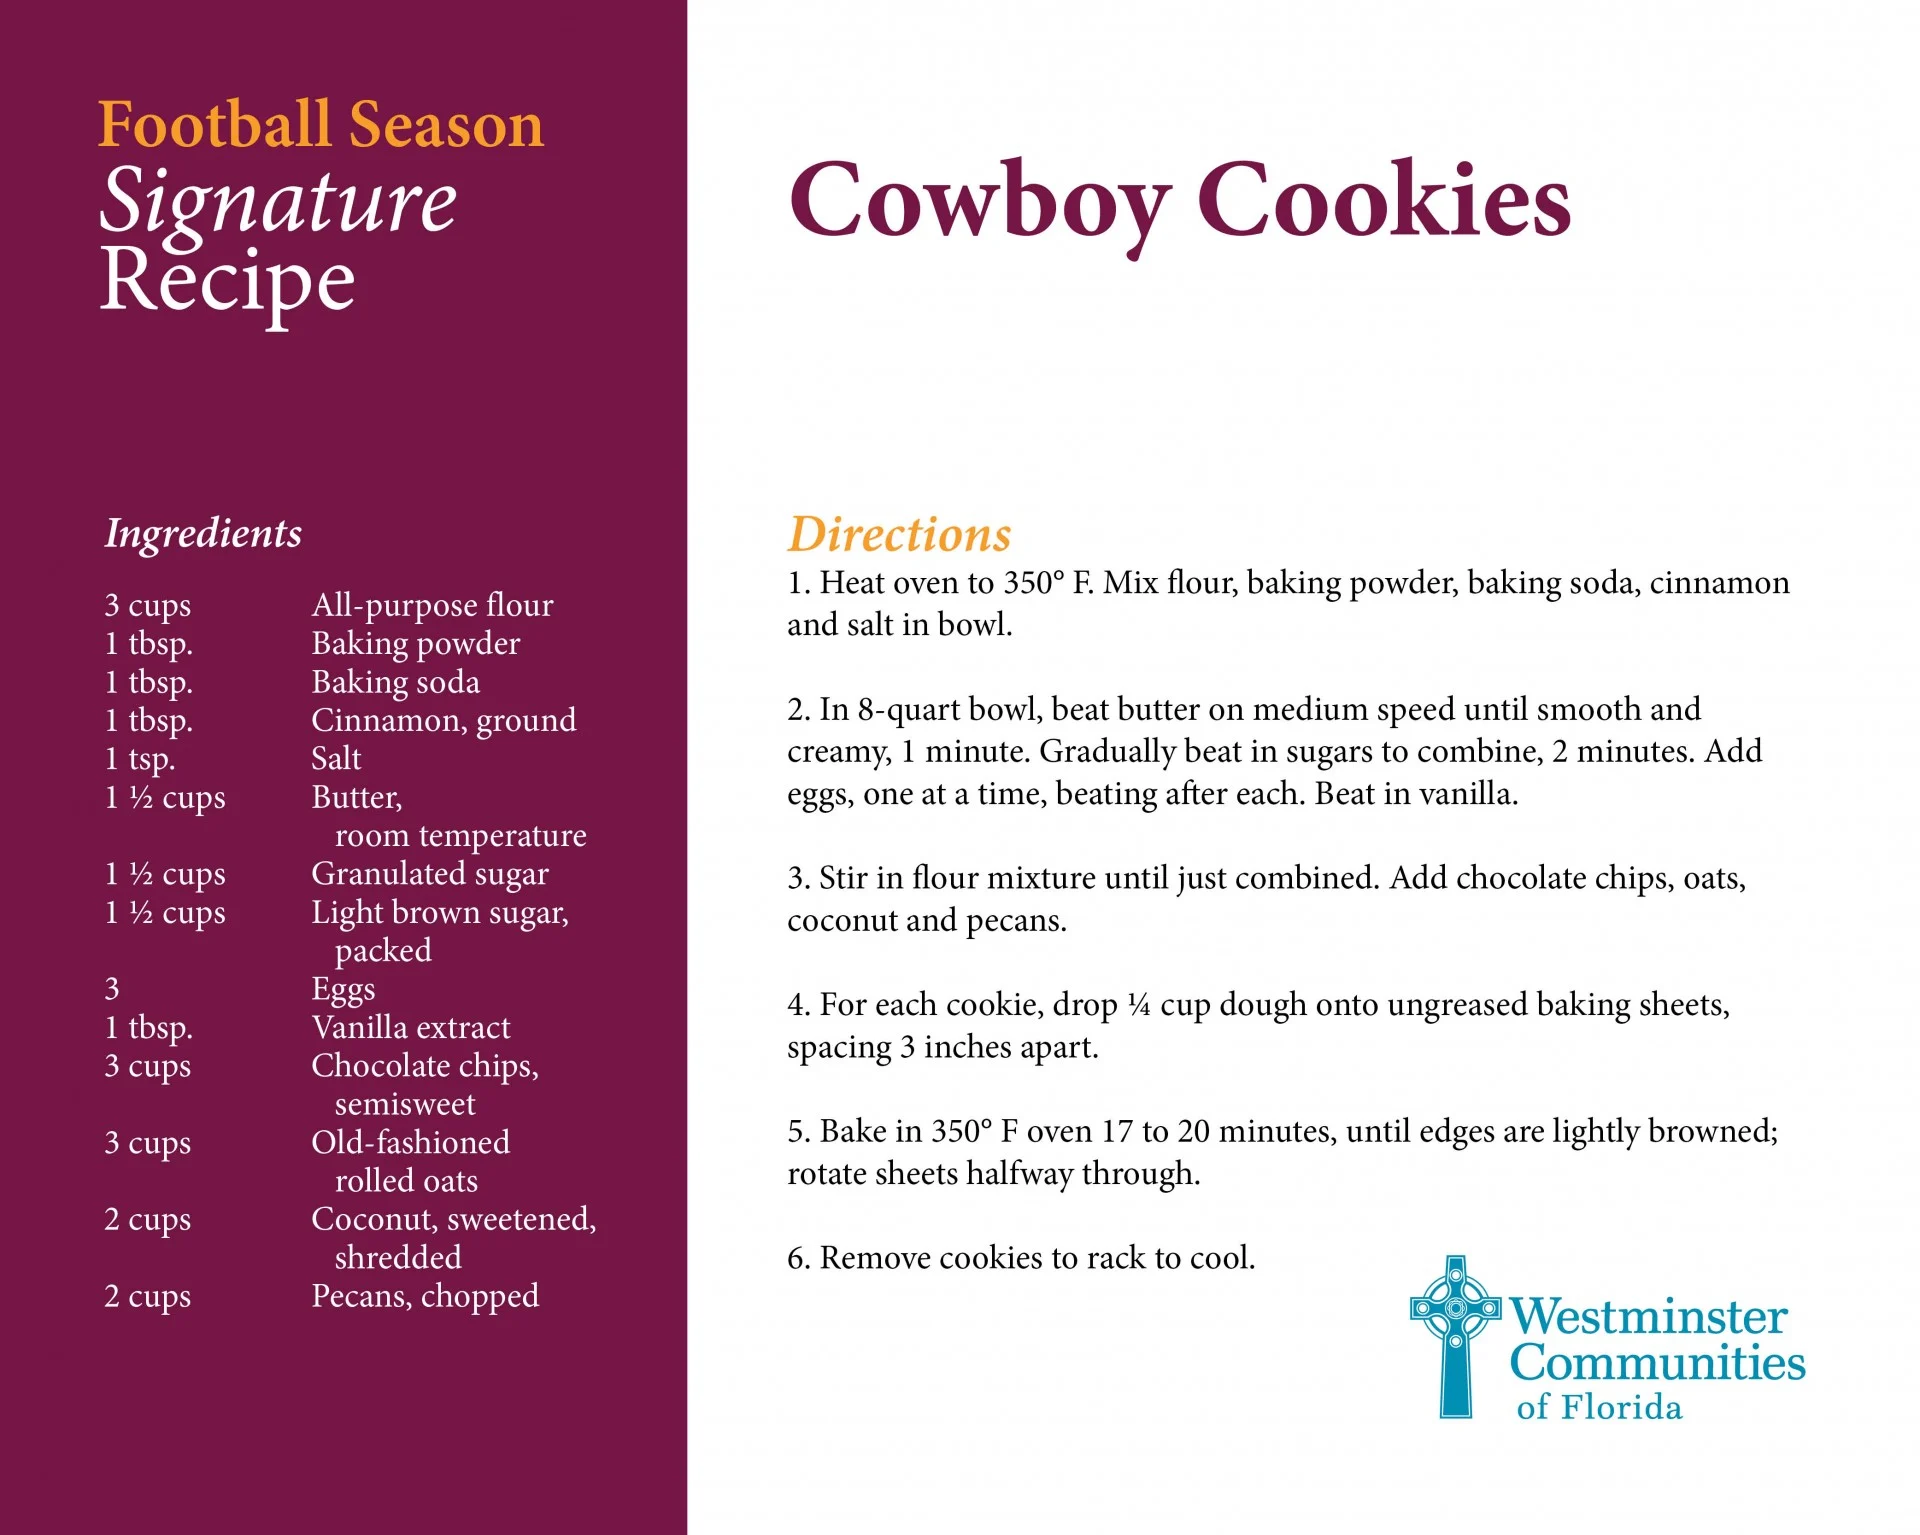 Our Signature Cowboy Cookies